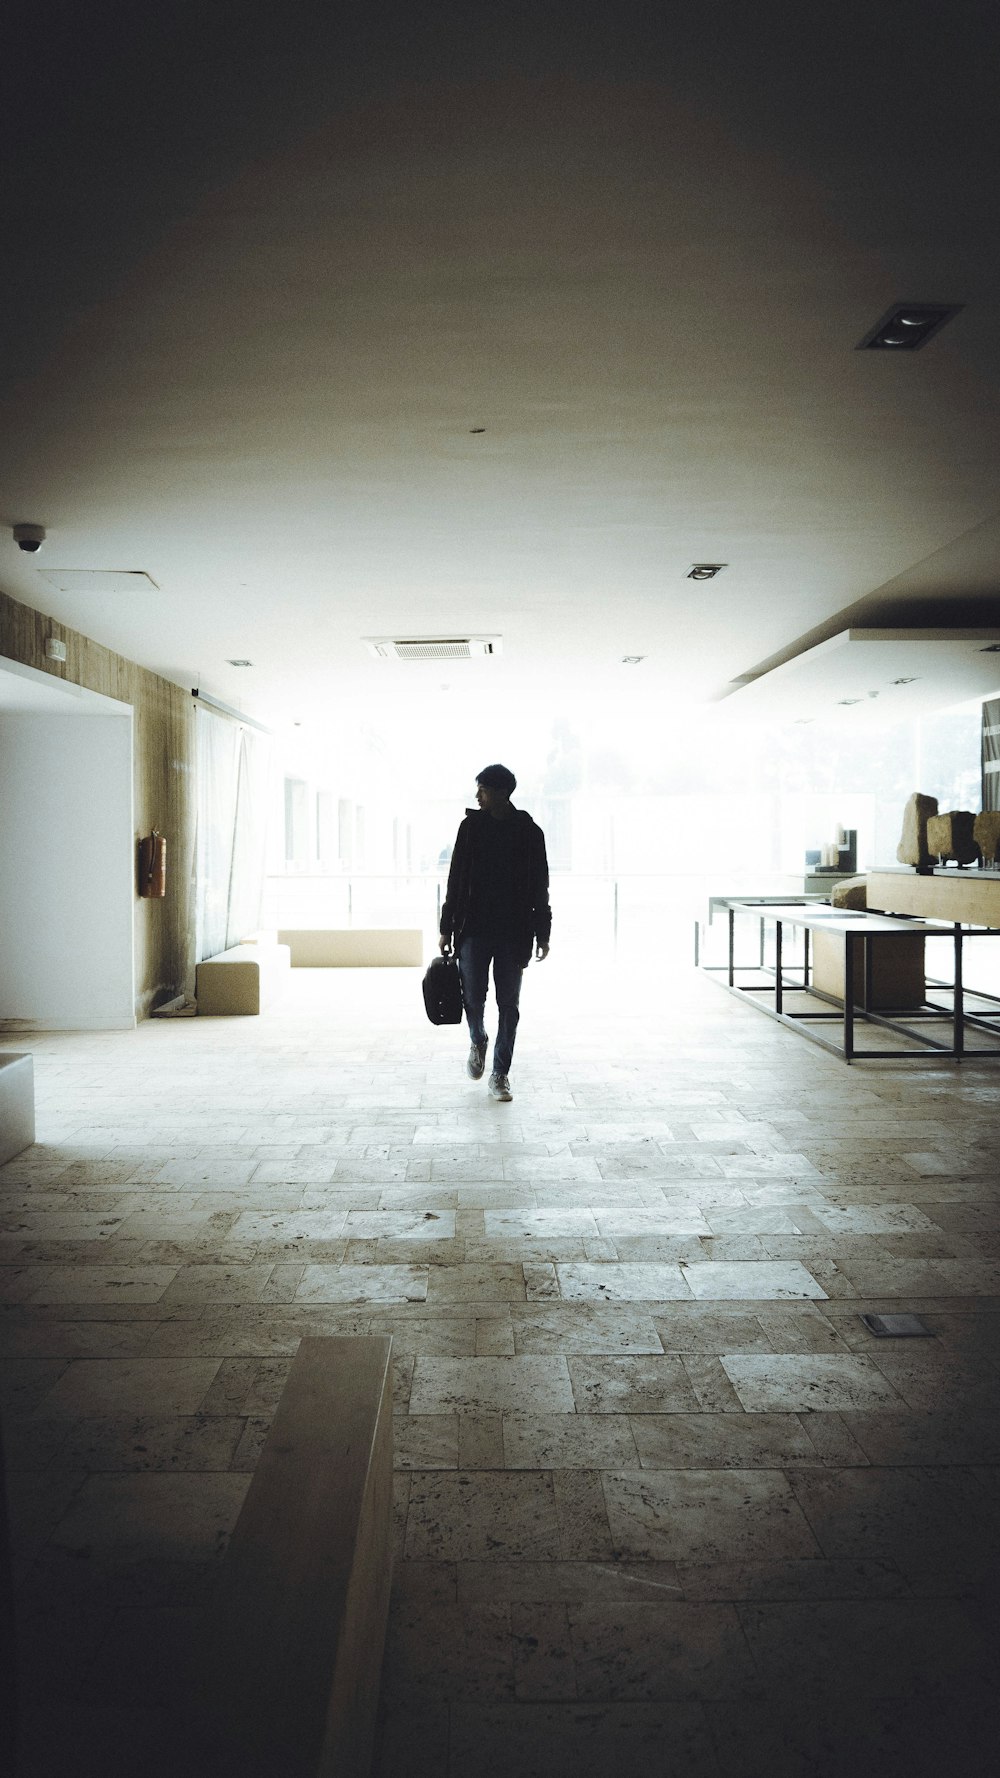 a man with a suitcase walks through a dimly lit room